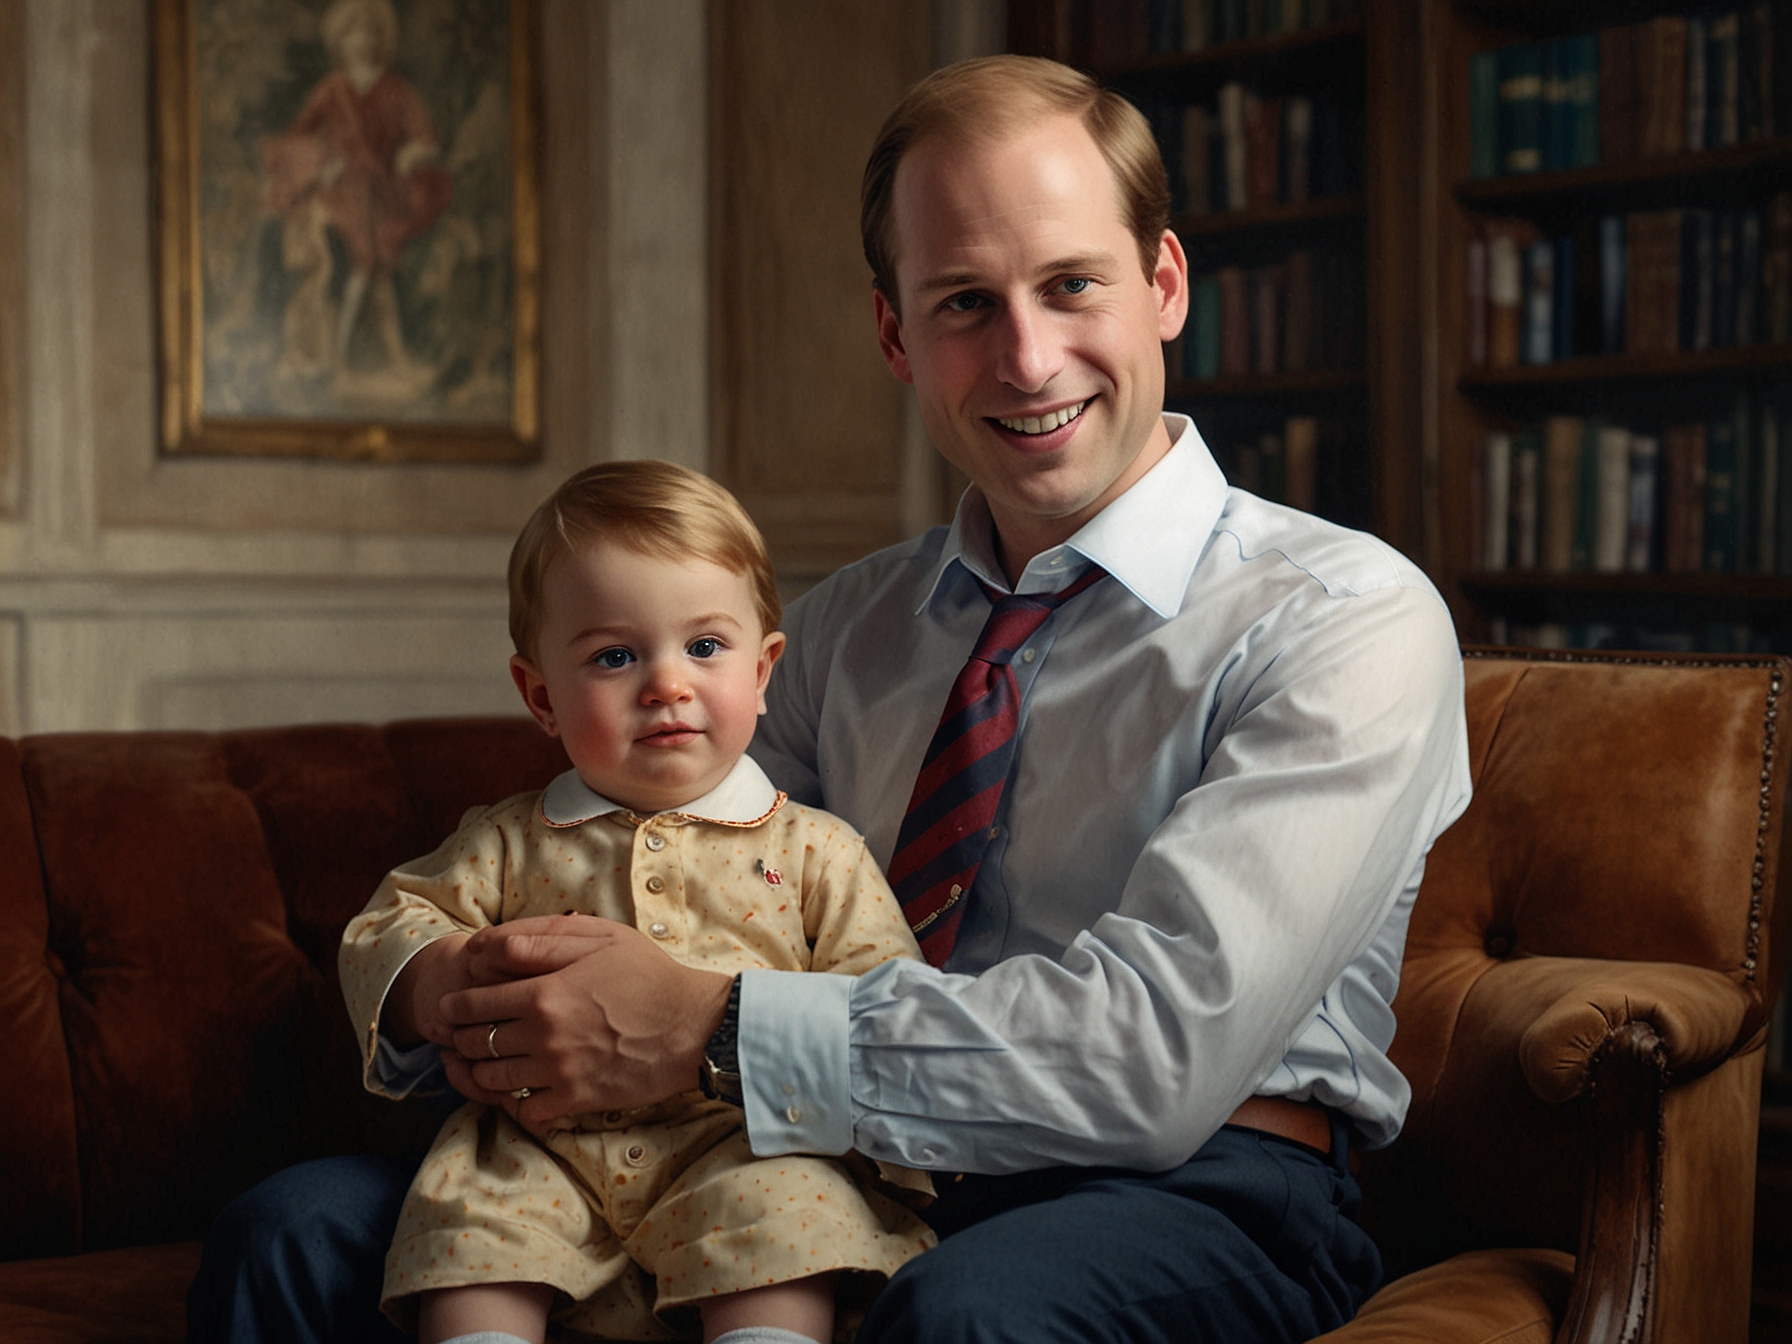 An intimate snapshot from the royal archives, capturing King Charles with little Prince William. This rare photo celebrates Prince William’s birthday and underscores familial love within the British monarchy.